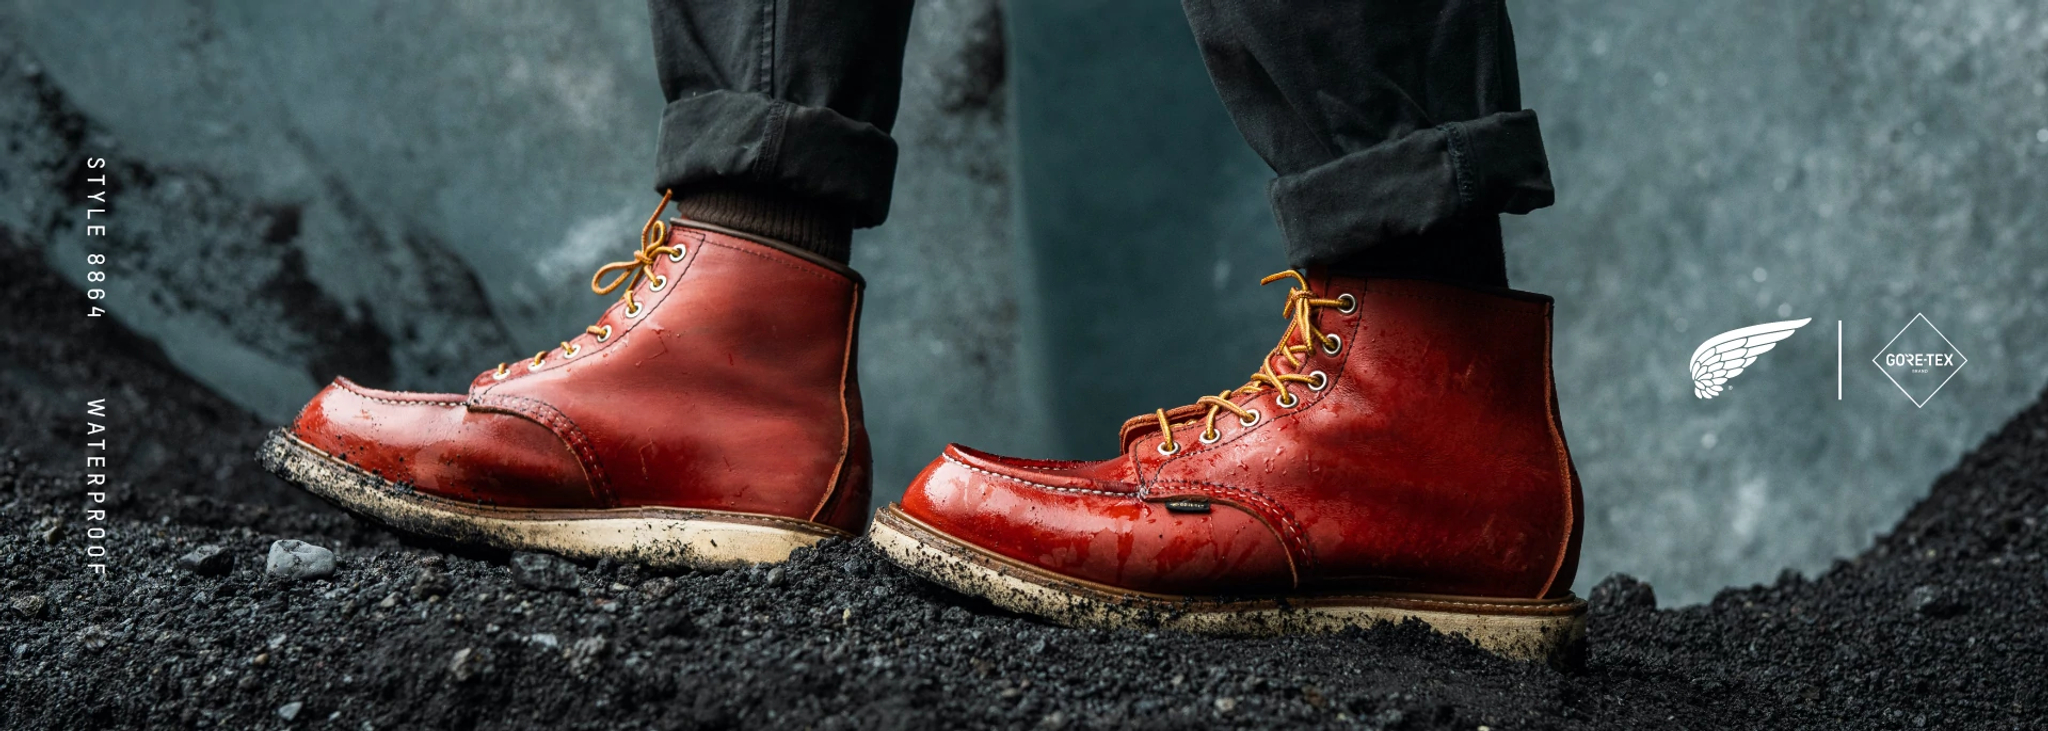 GORE-TEX Classic Moc | Red Wing Shoes